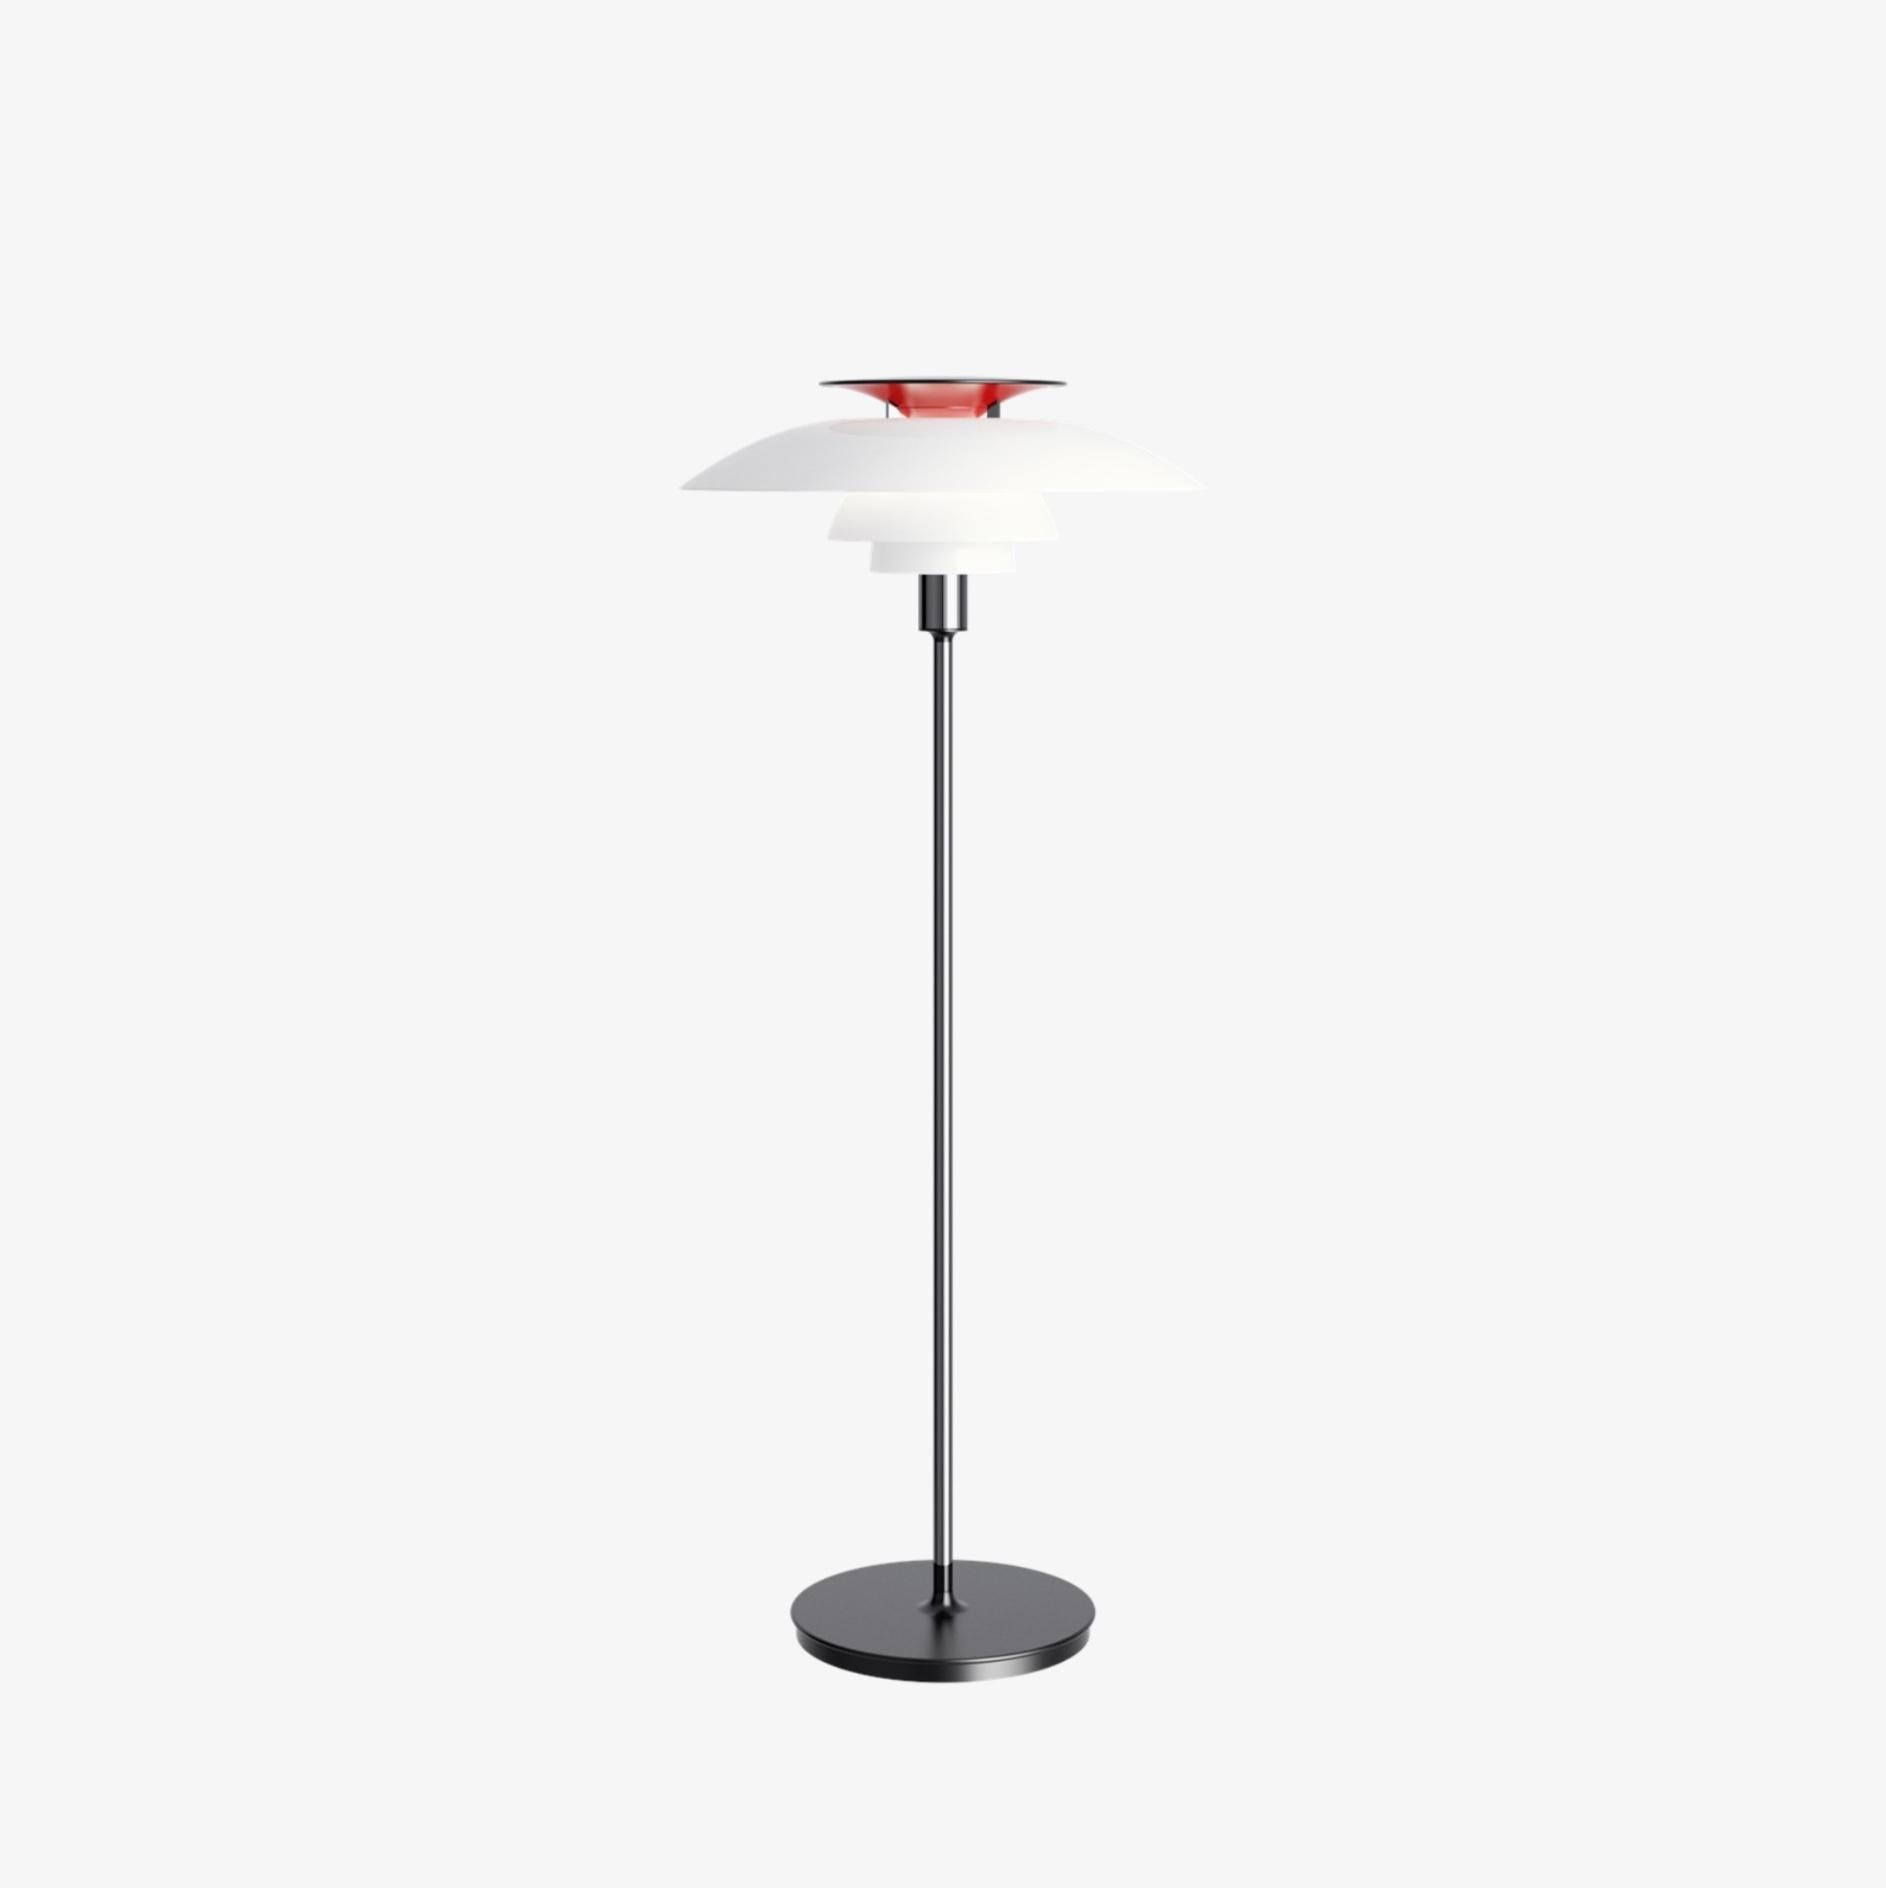 Poul Henningsen 'PH 80' floor lamp in white and chrome for Louis Poulsen. New, current production.

Poul Henningsen designed the three-shade-system back in 1925-26. In collaboration with Louis Poulsen, Henningsen designed the first lamps to use